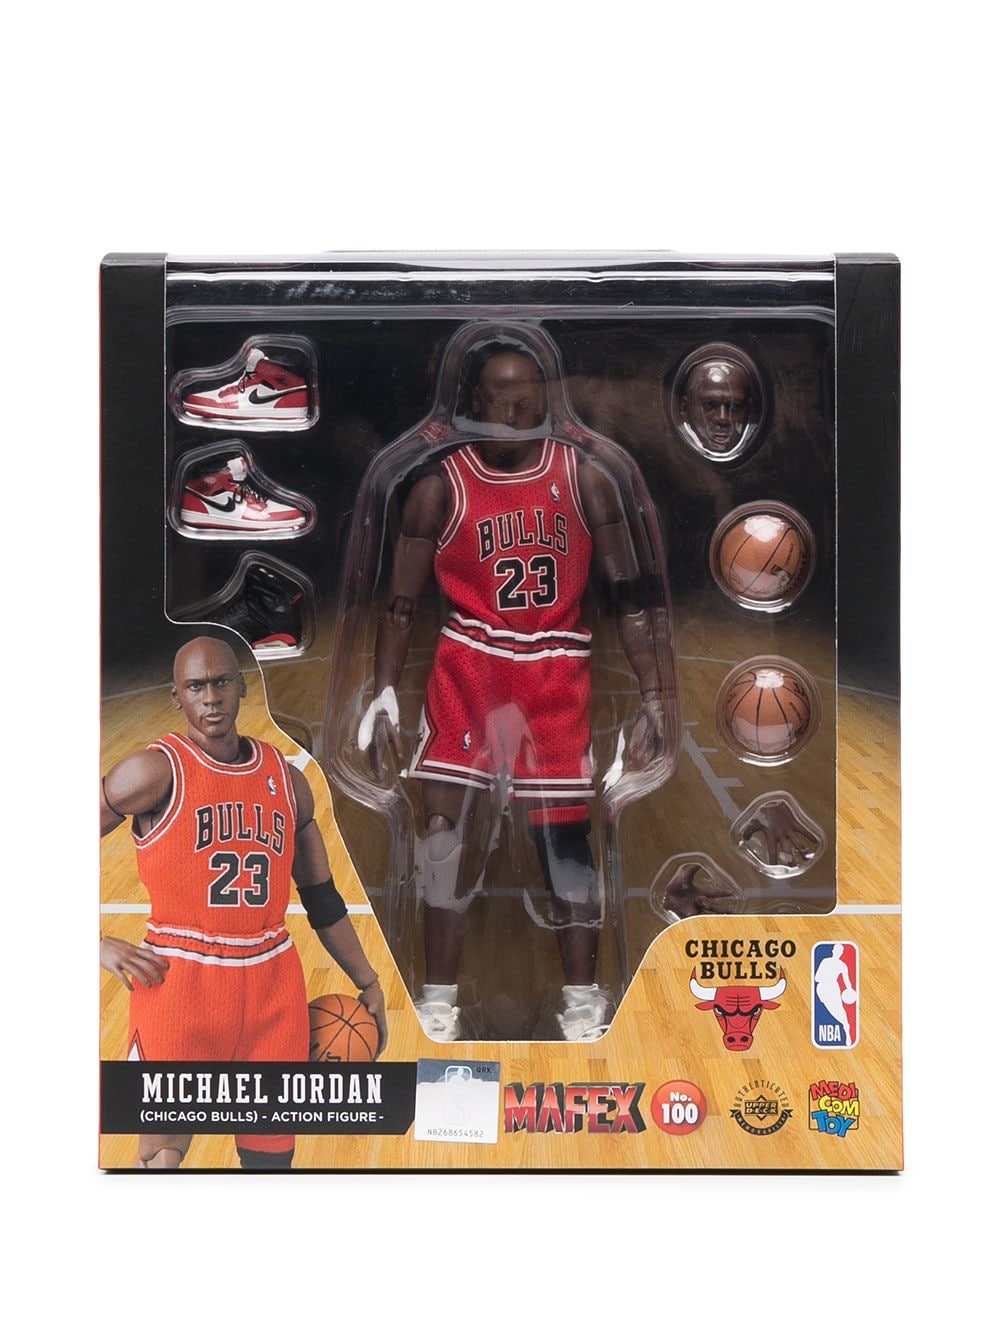 Stream Italy  Medicom Toy Just Dropped a Michael Jordan MAFEX Action